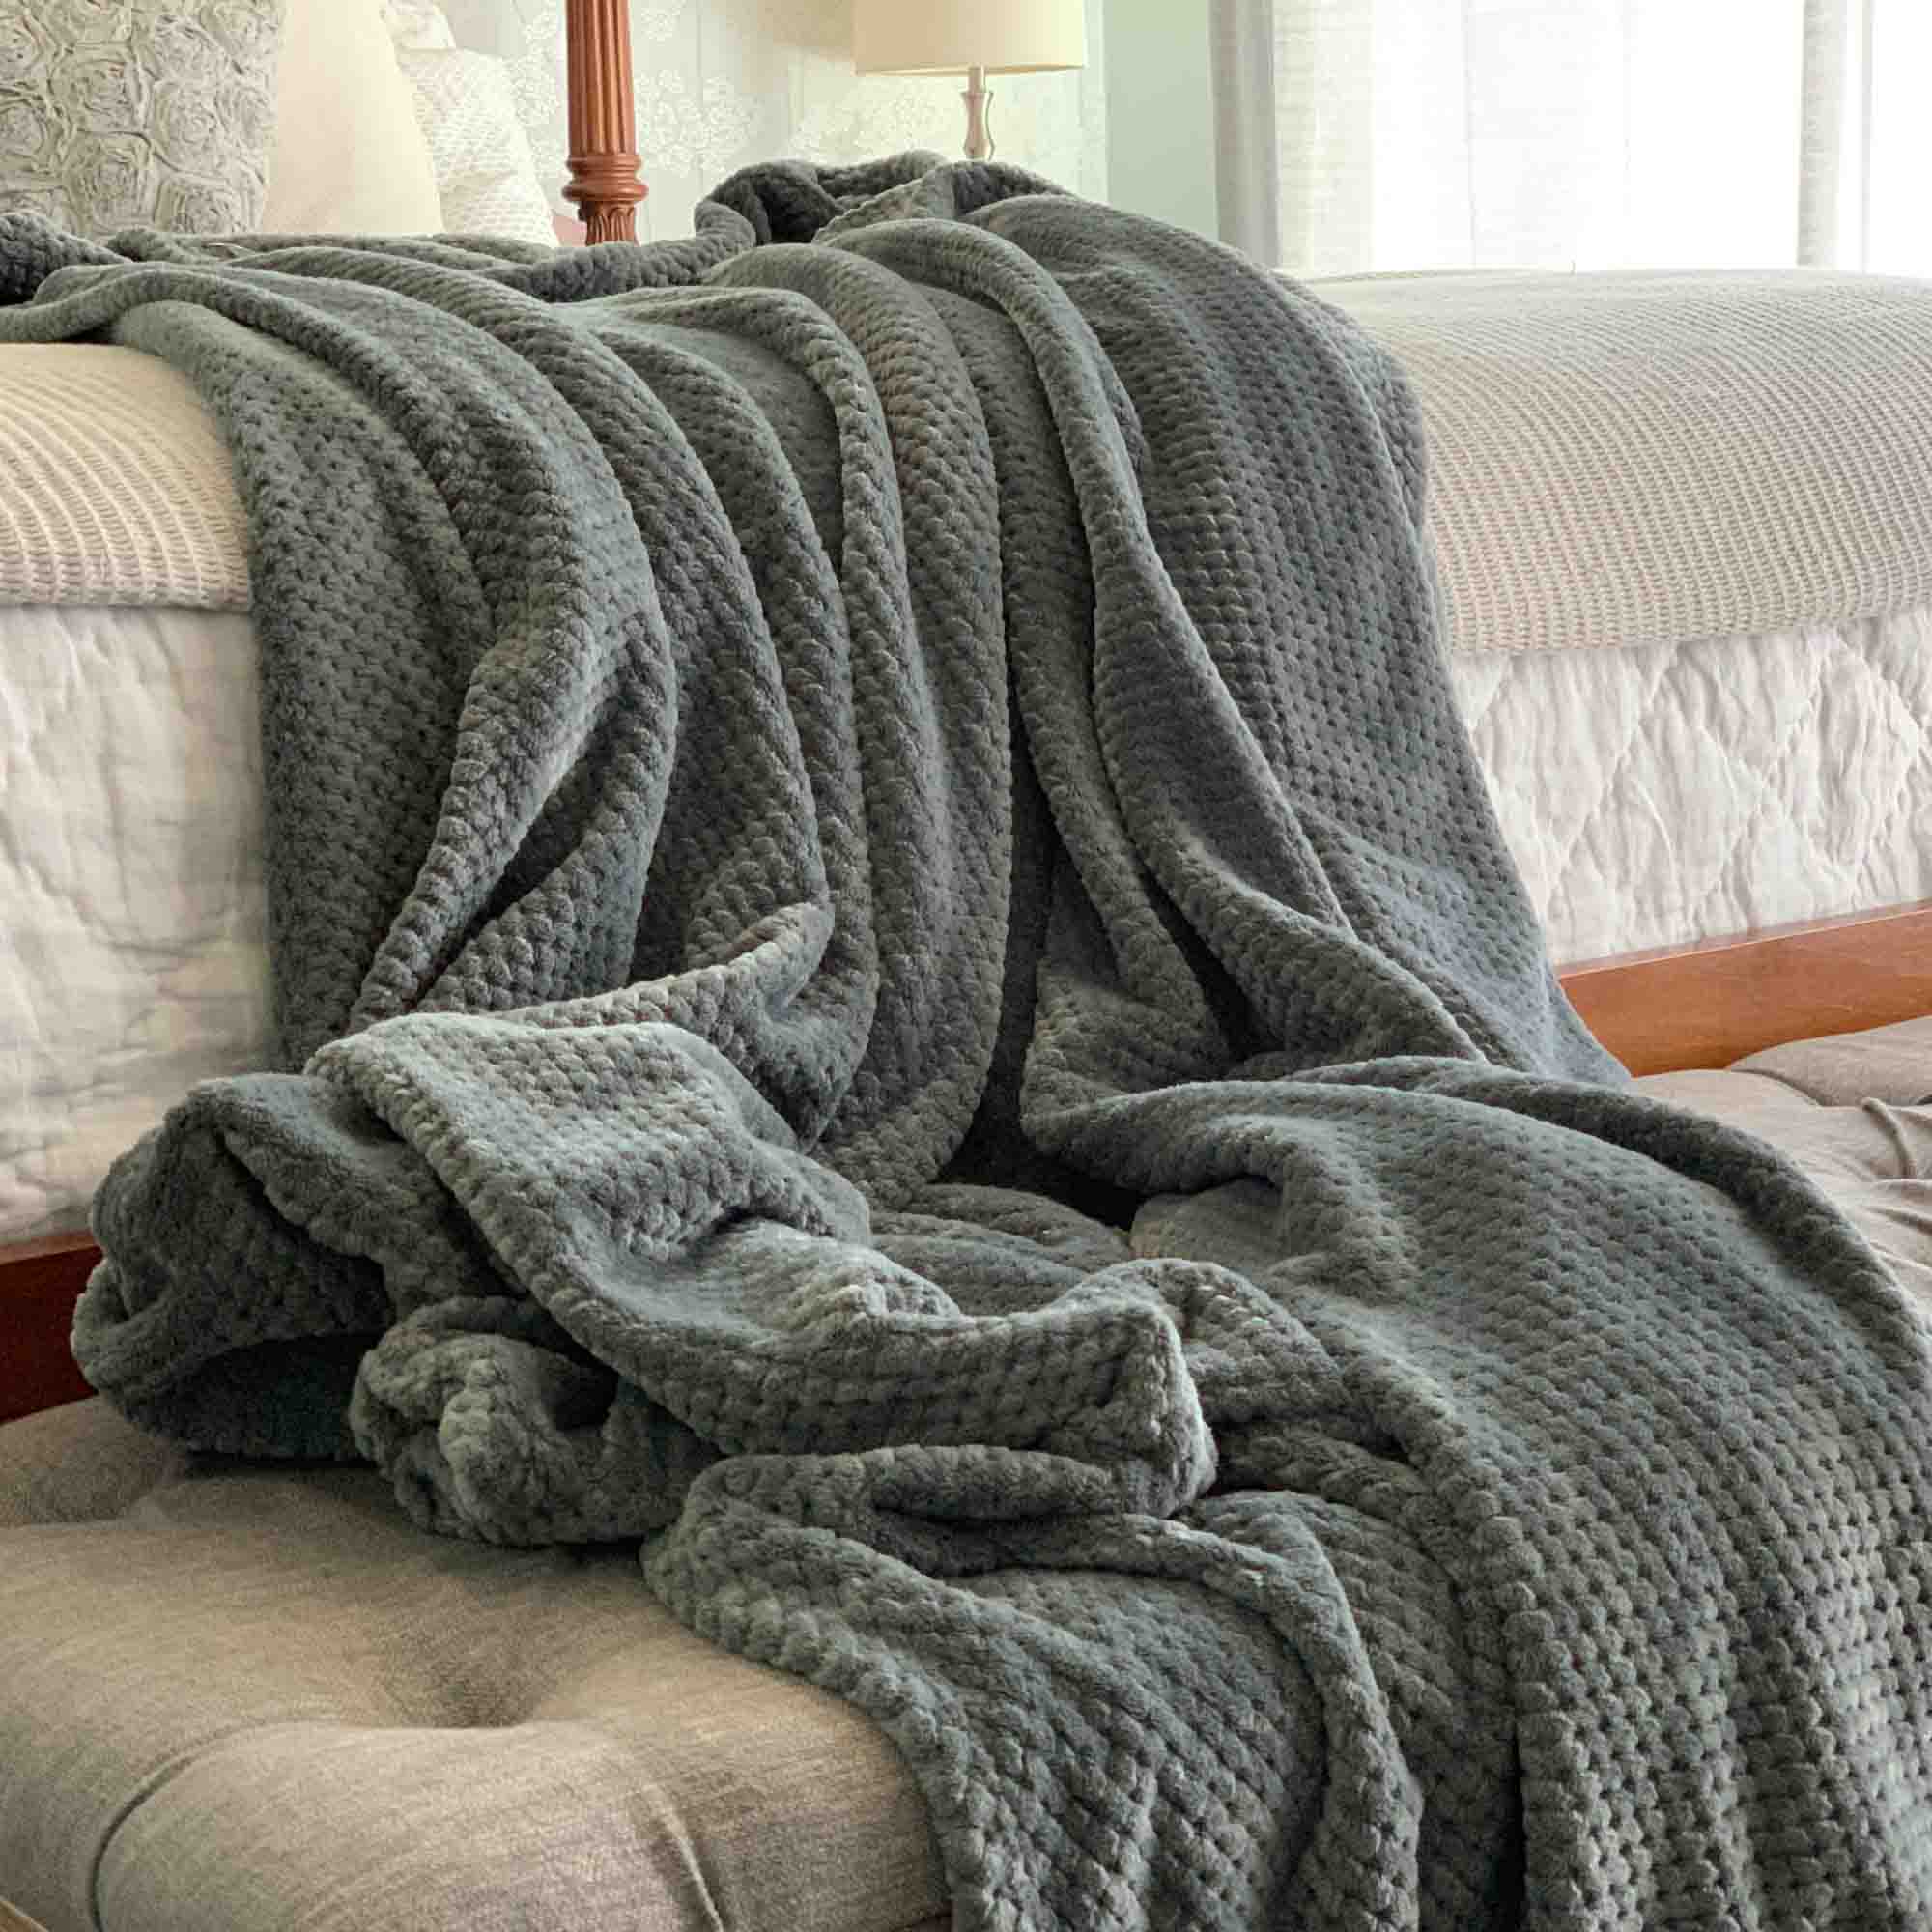 Image of a gray color Microfiber fleece throw blanket draped over a bed and bench